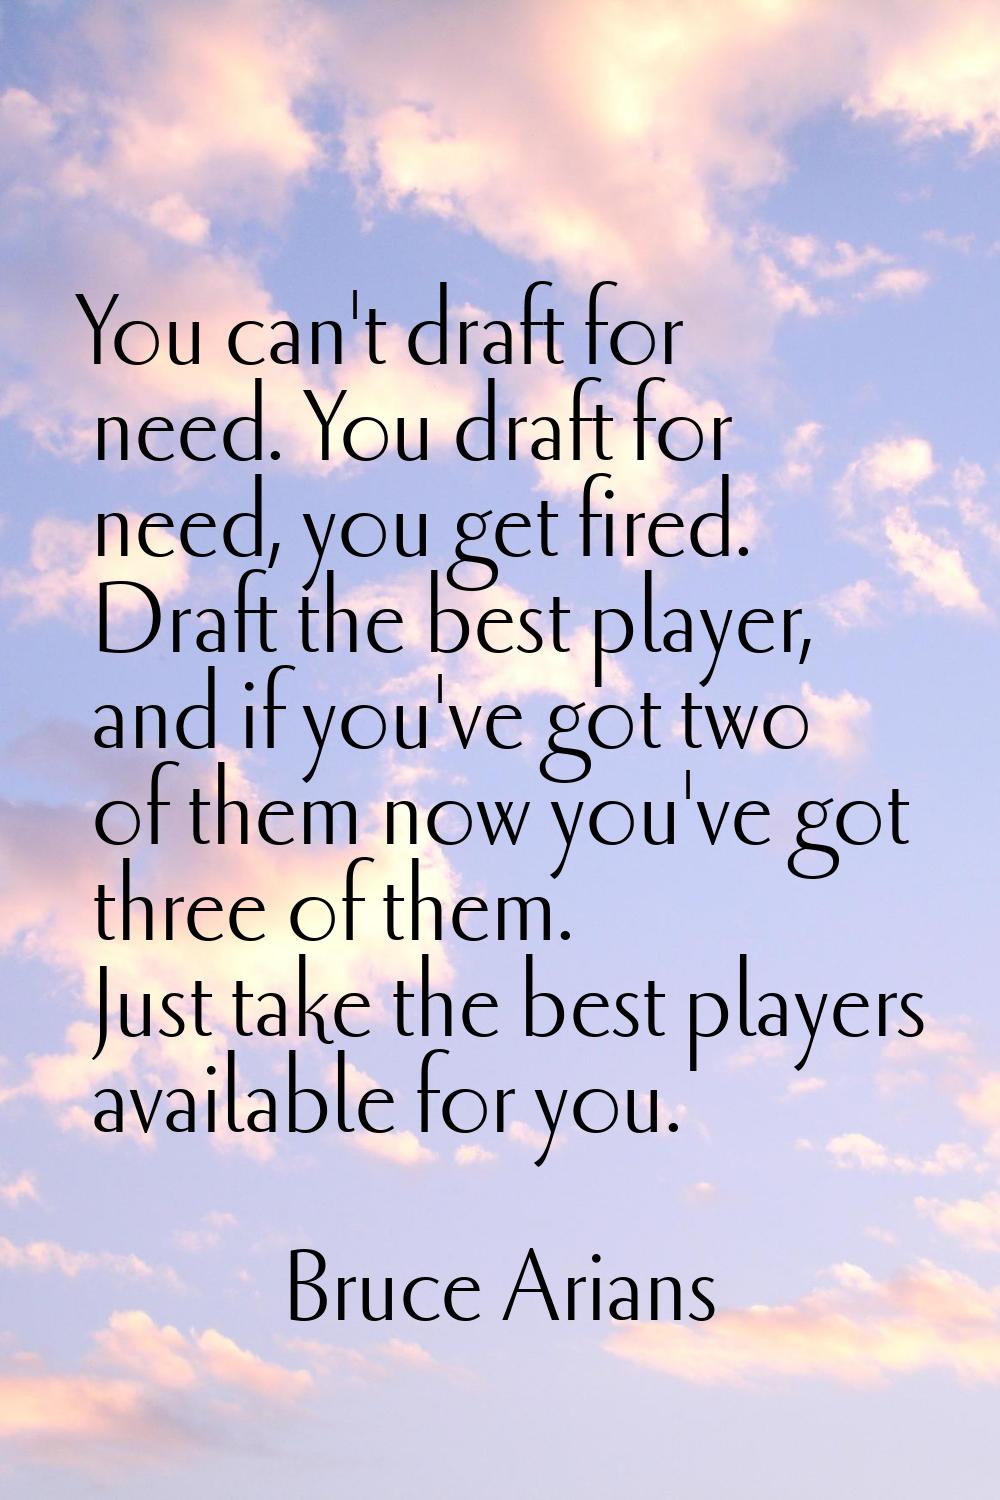 You can't draft for need. You draft for need, you get fired. Draft the best player, and if you've g